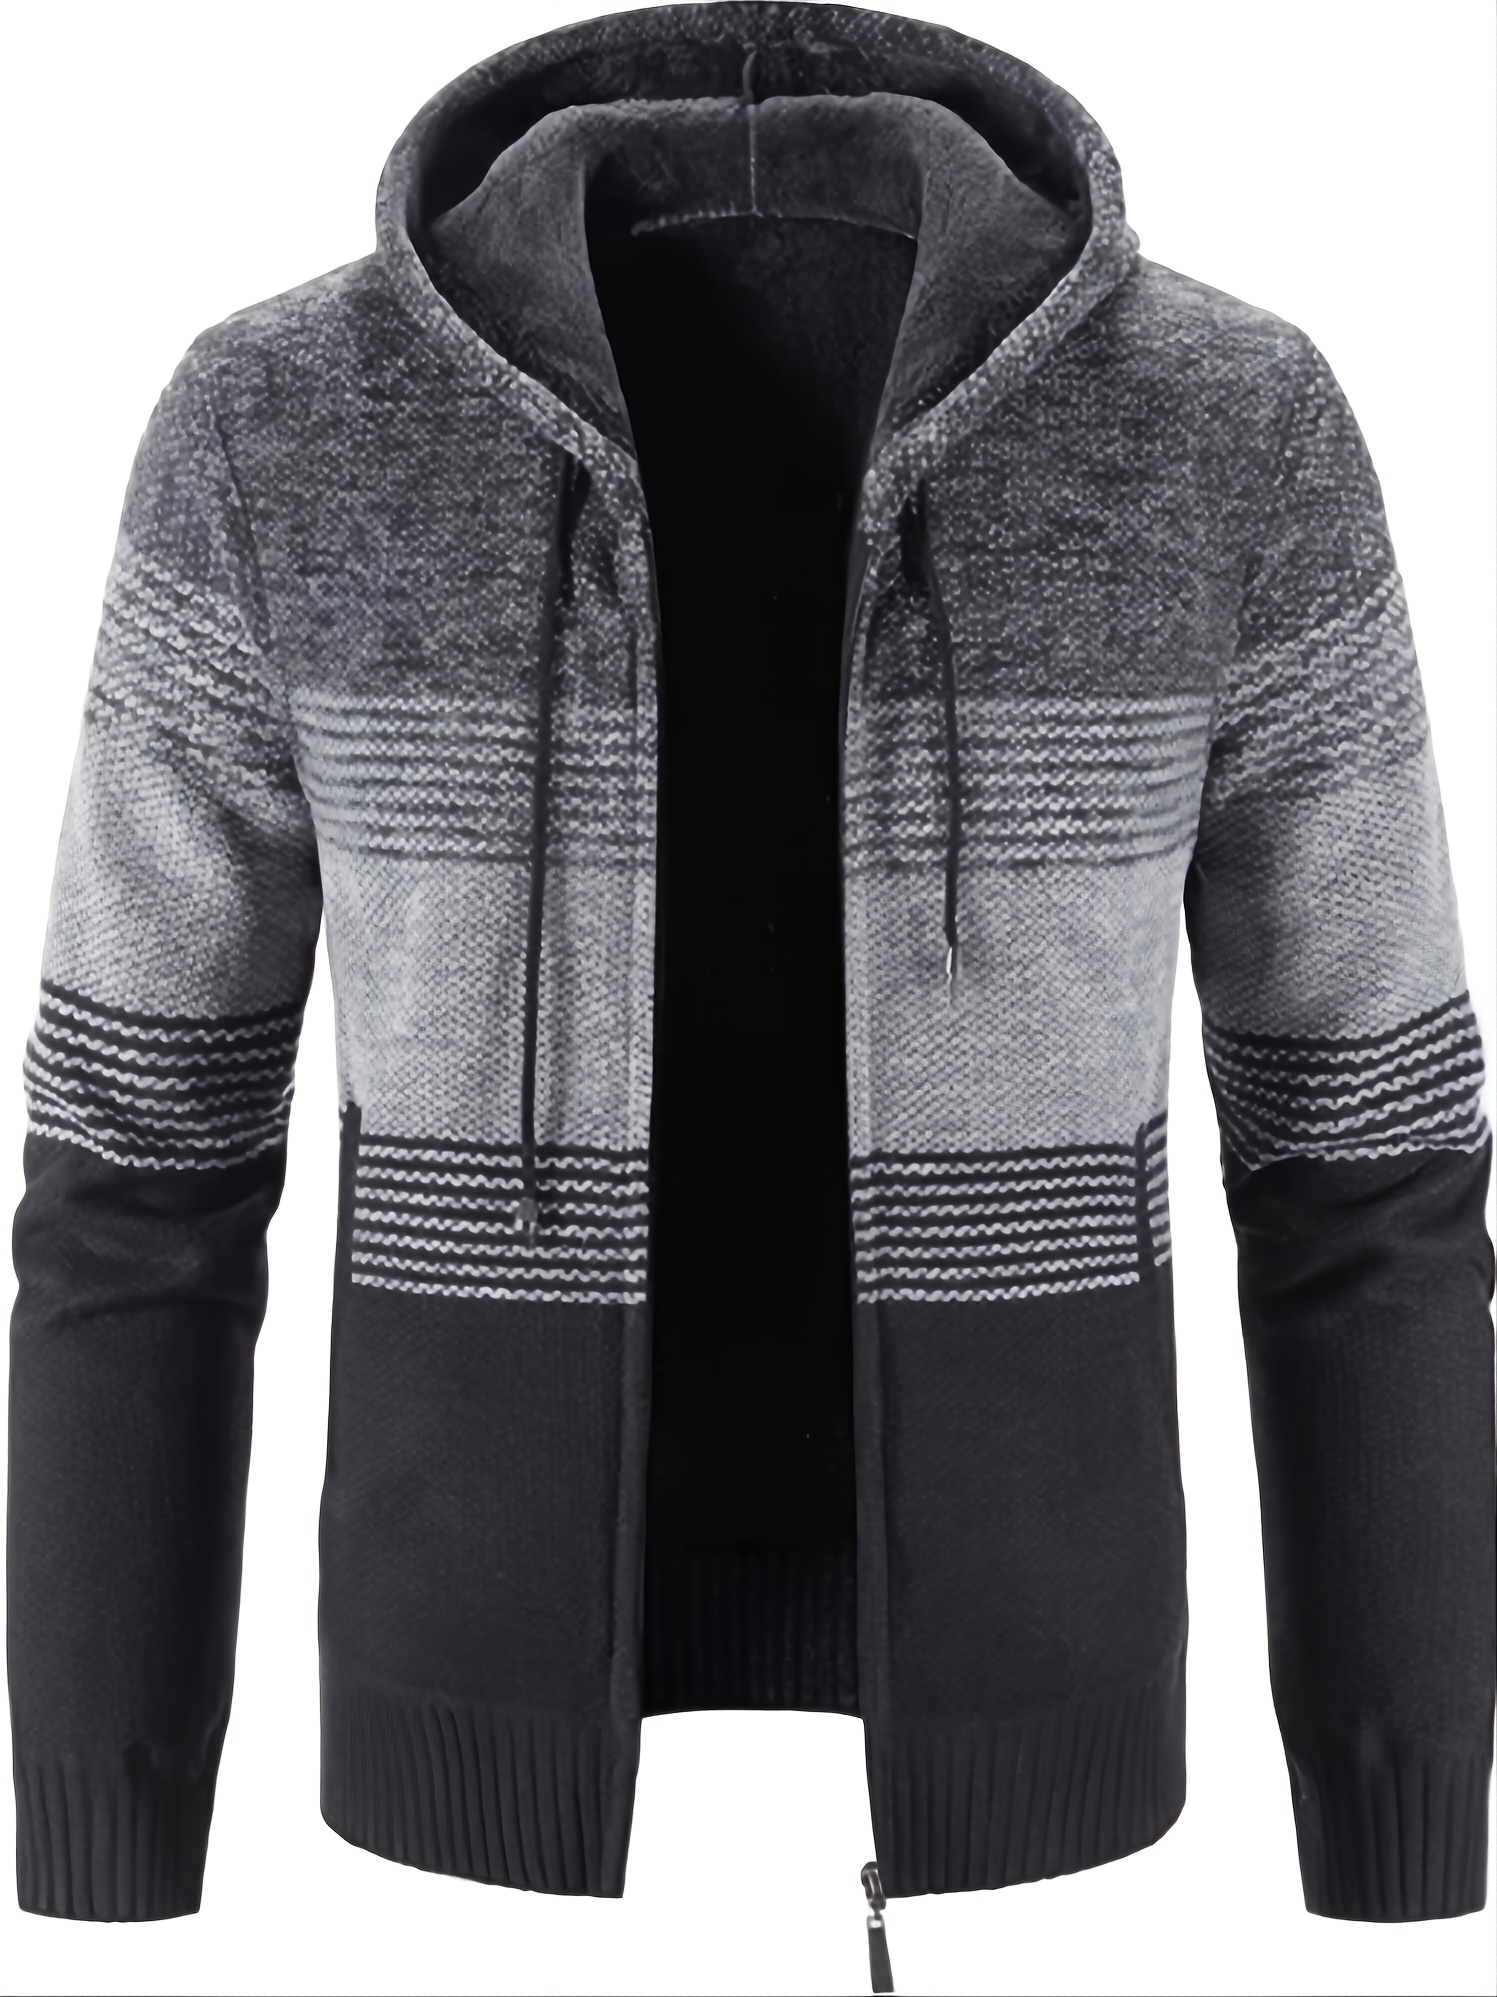 Provide the latest products SWISSWELL Mens Thick Warm Fleece Jacket ...